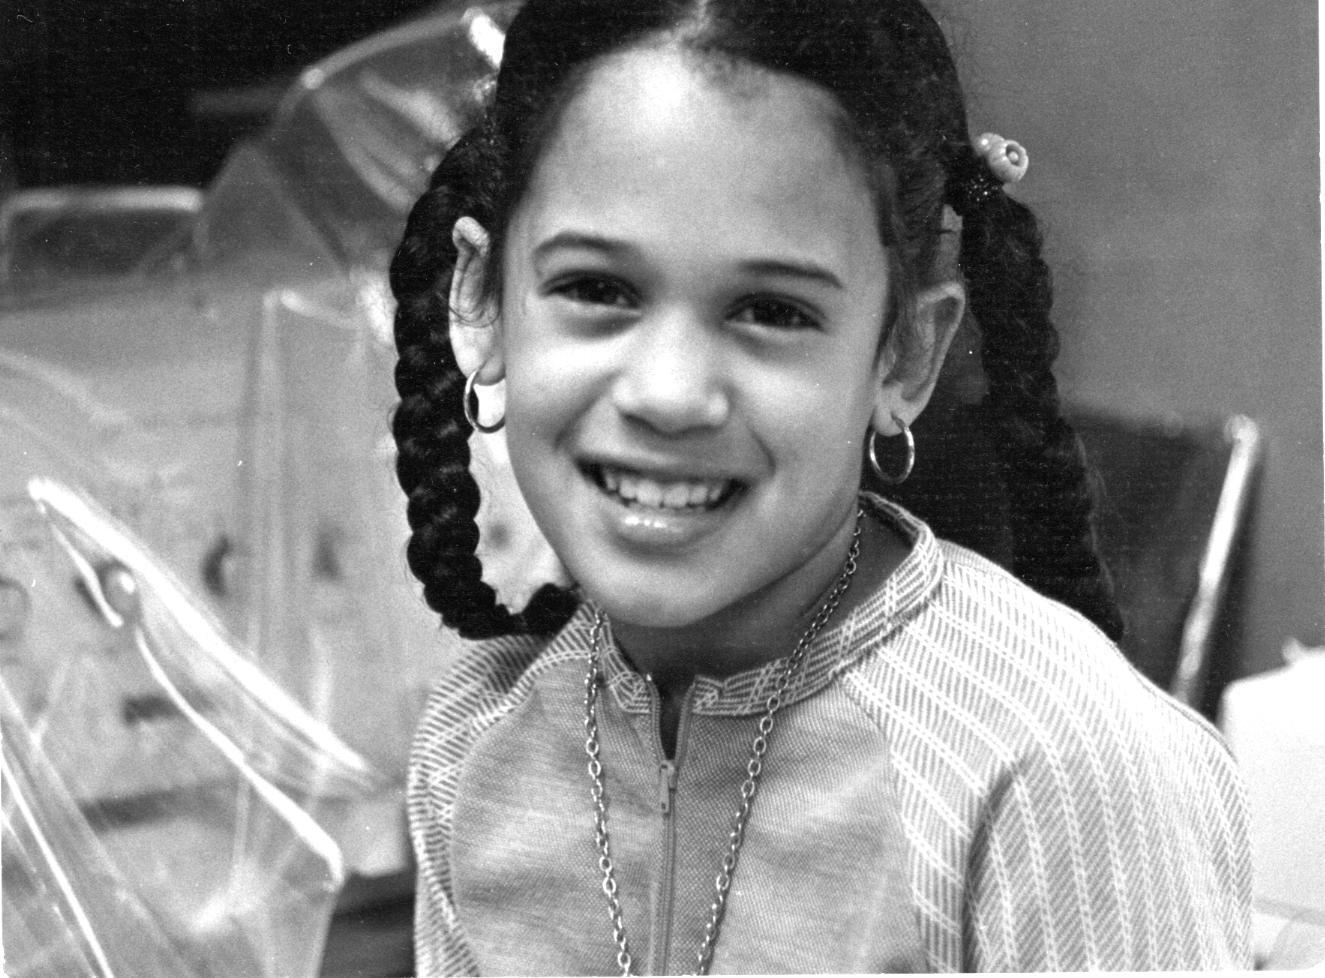 11 photos that show Kamala Harris' childhood in Oakland and life before politics - Los Angeles Times